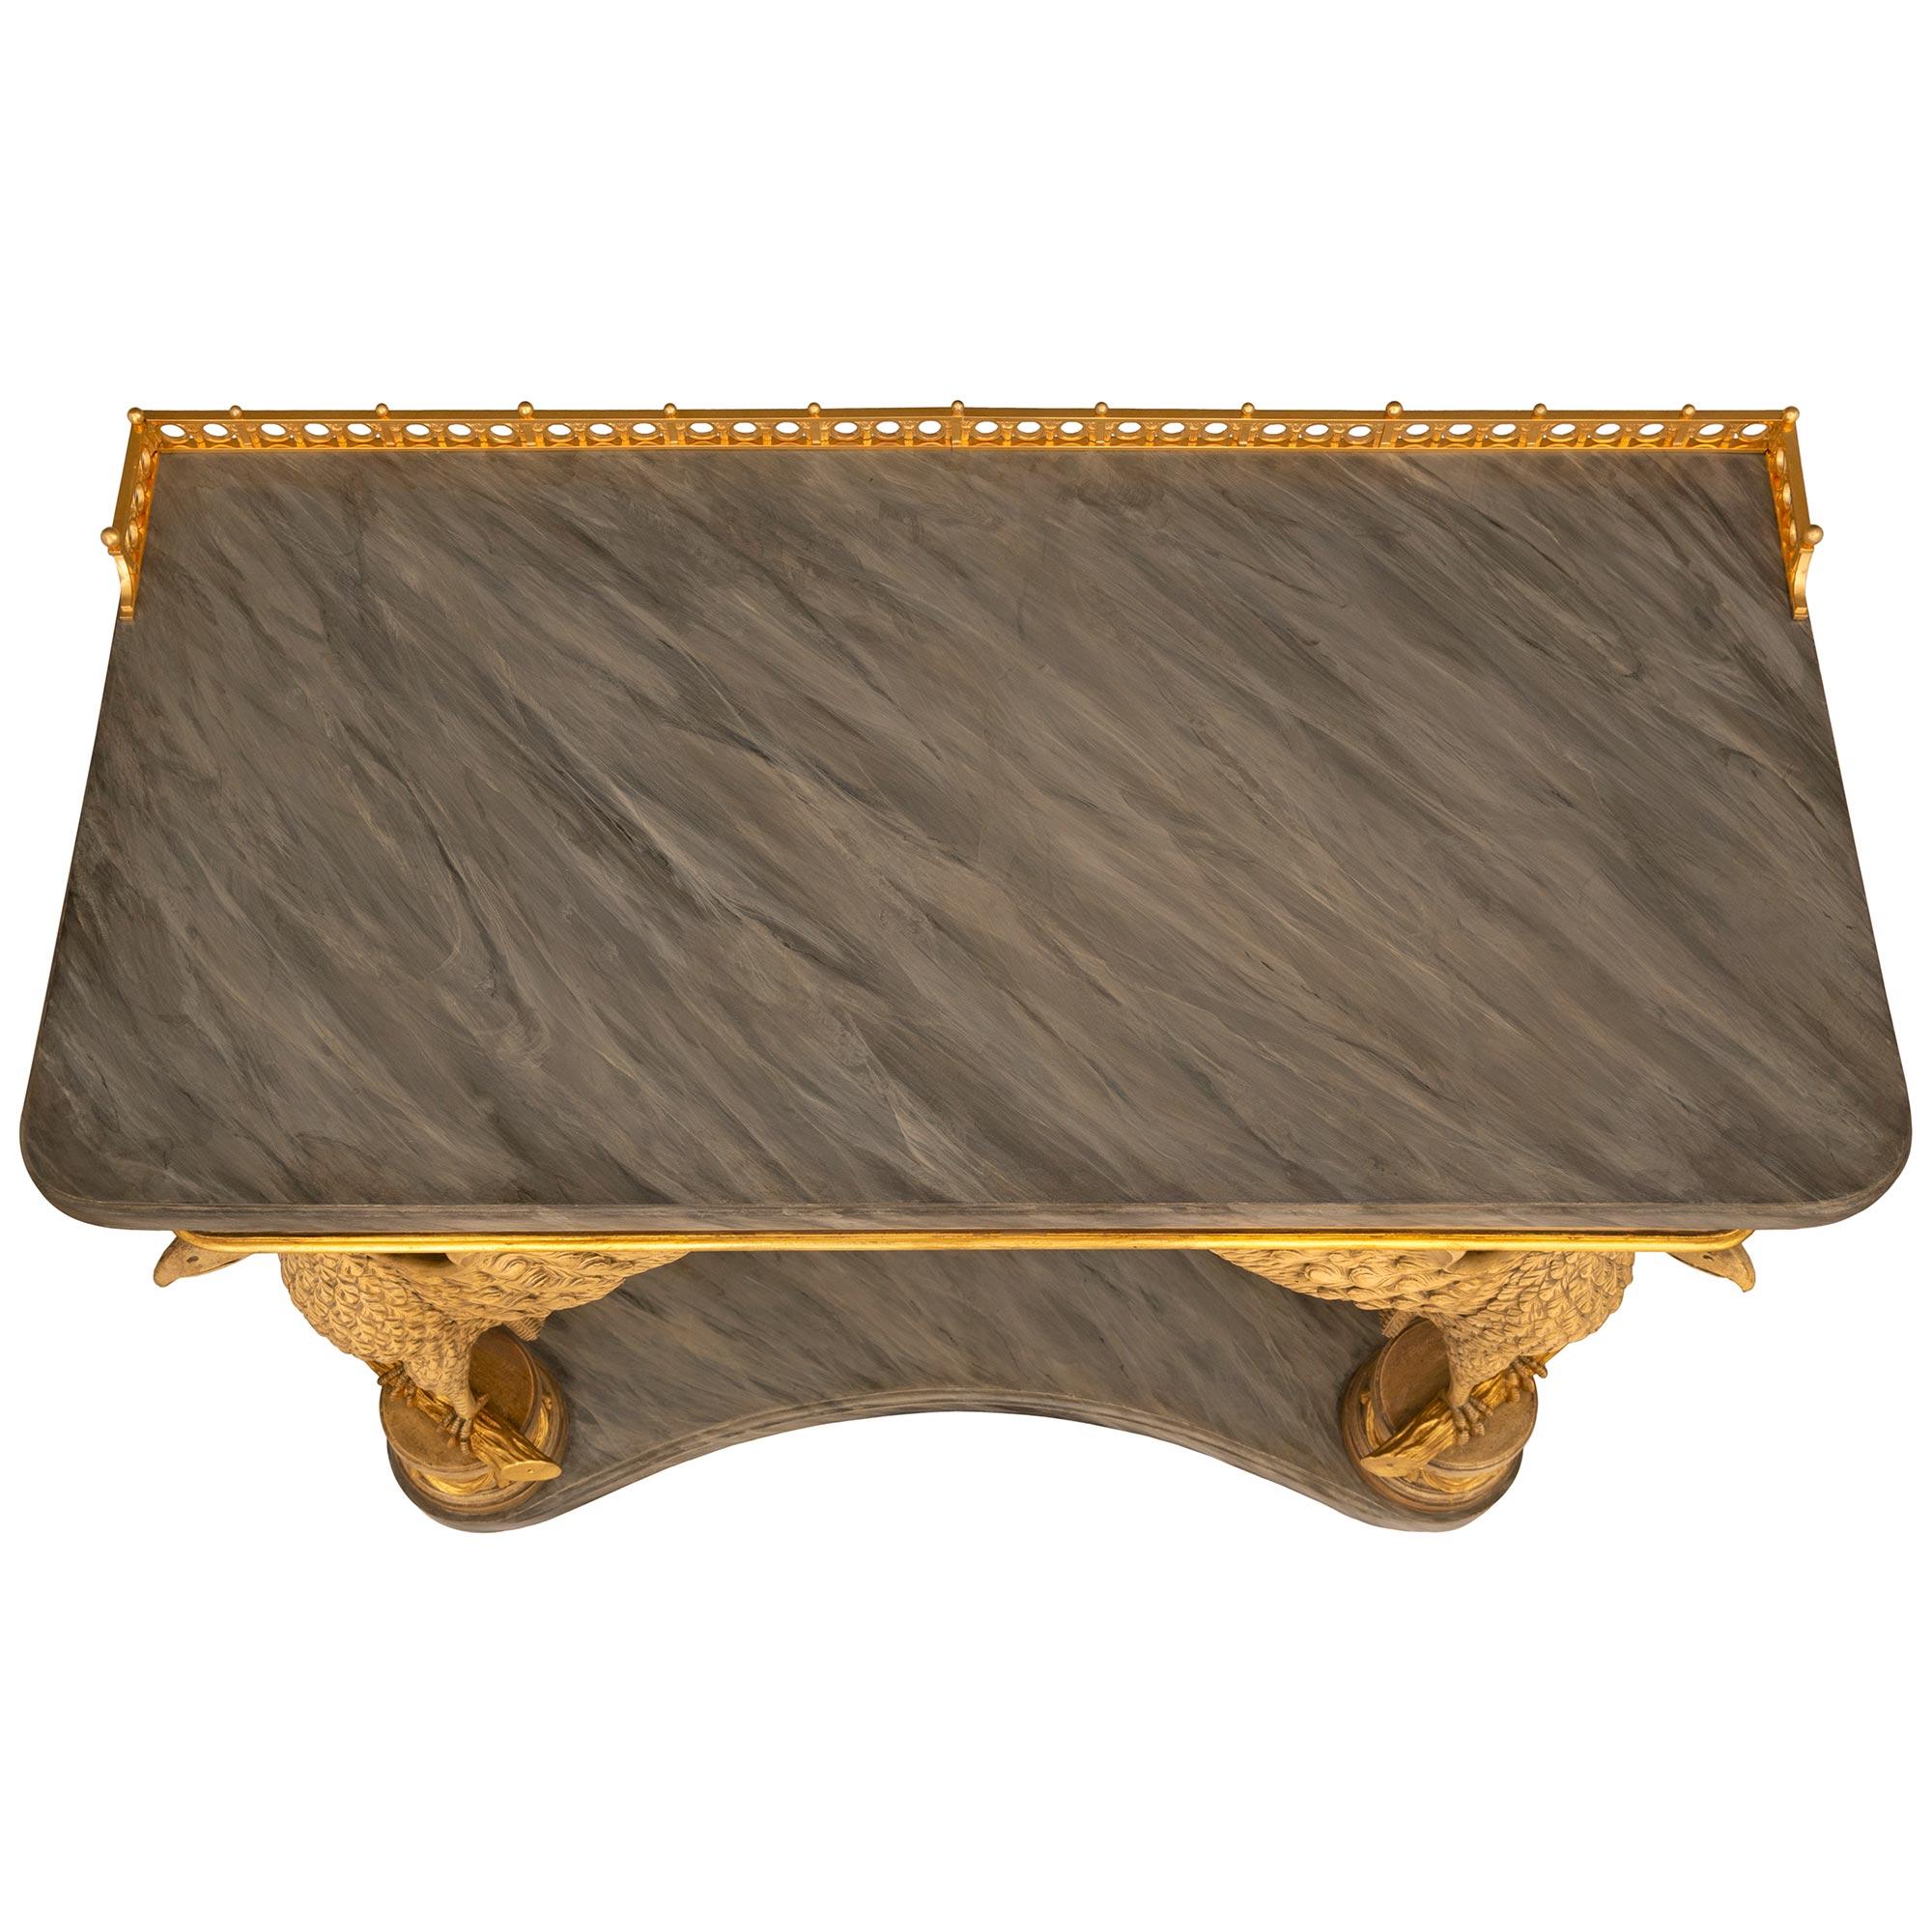 A most unique and extremely decorative Continental 19th century Neo-Classical st. patinated wood, faux painted marble and Giltwood console. The freestanding console is raised by a faux Gris St. Anne marble base with a mottled border. Above are two